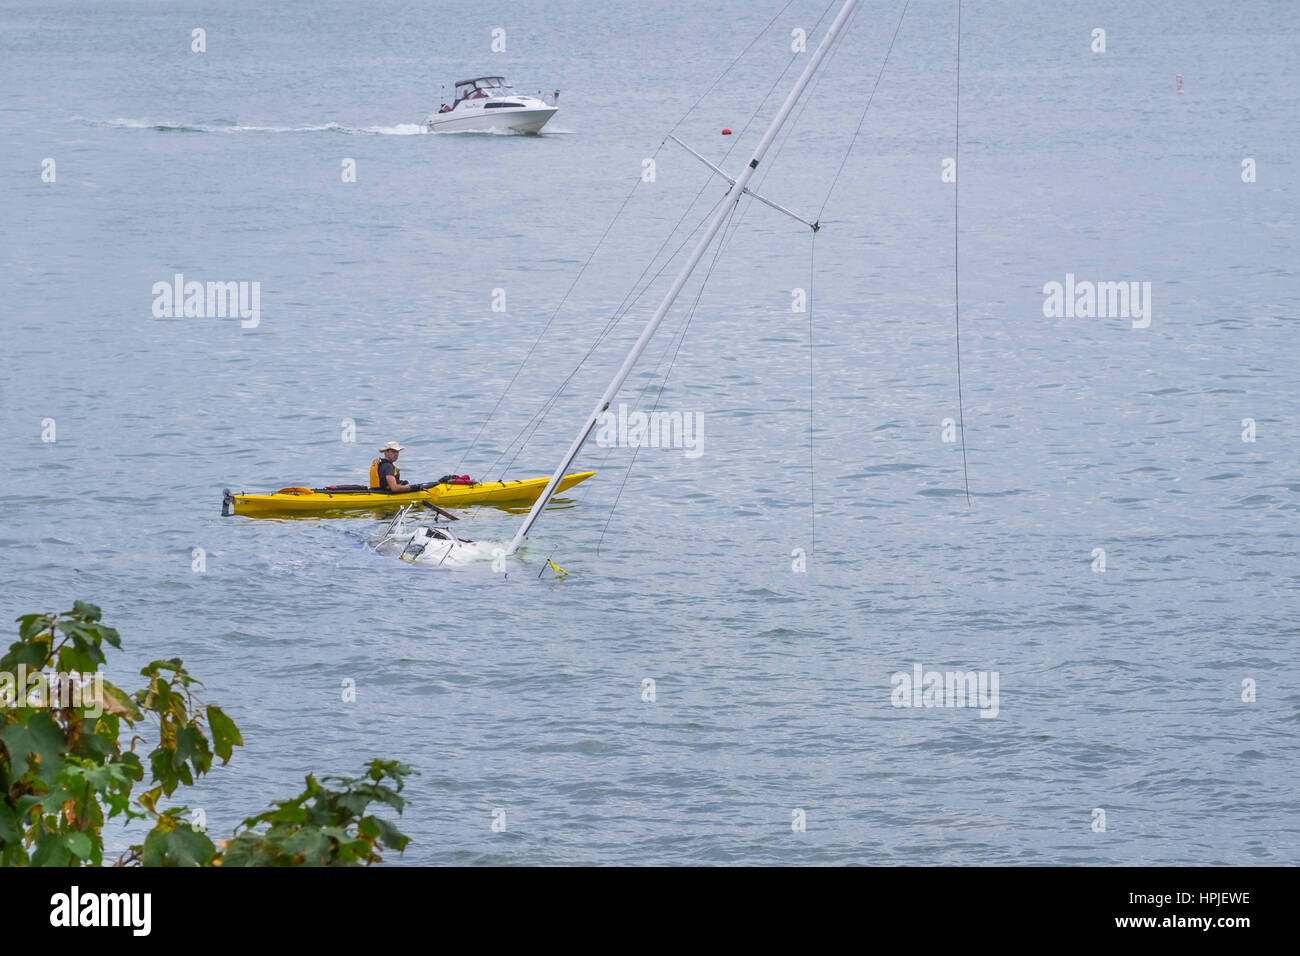 A man in a yellow kayak inspects submerged sailboat in English Bay Vancouver British Columbia Canada. Stock Photo